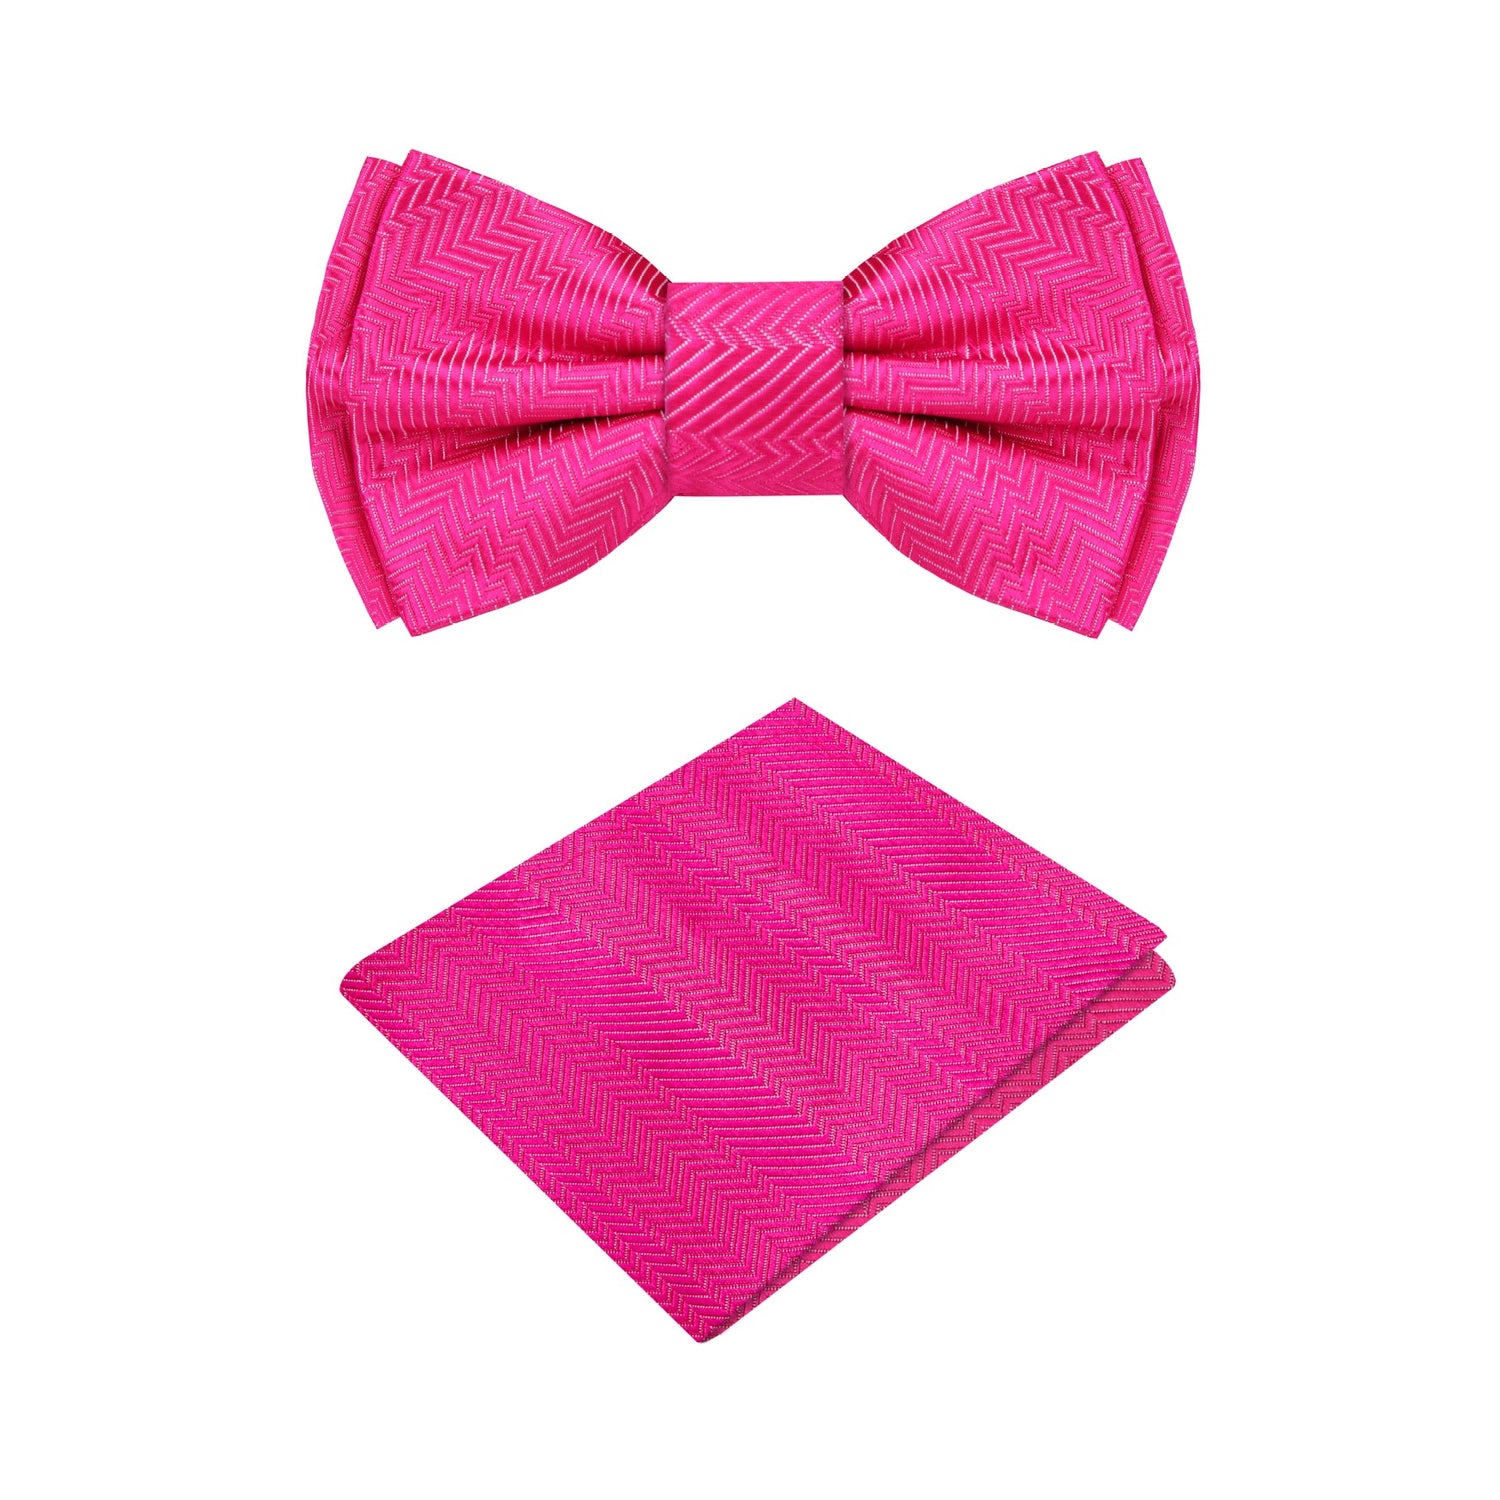 A Gumball Pink Solid Pattern Self Tie Bow Tie, Matching Pocket Square